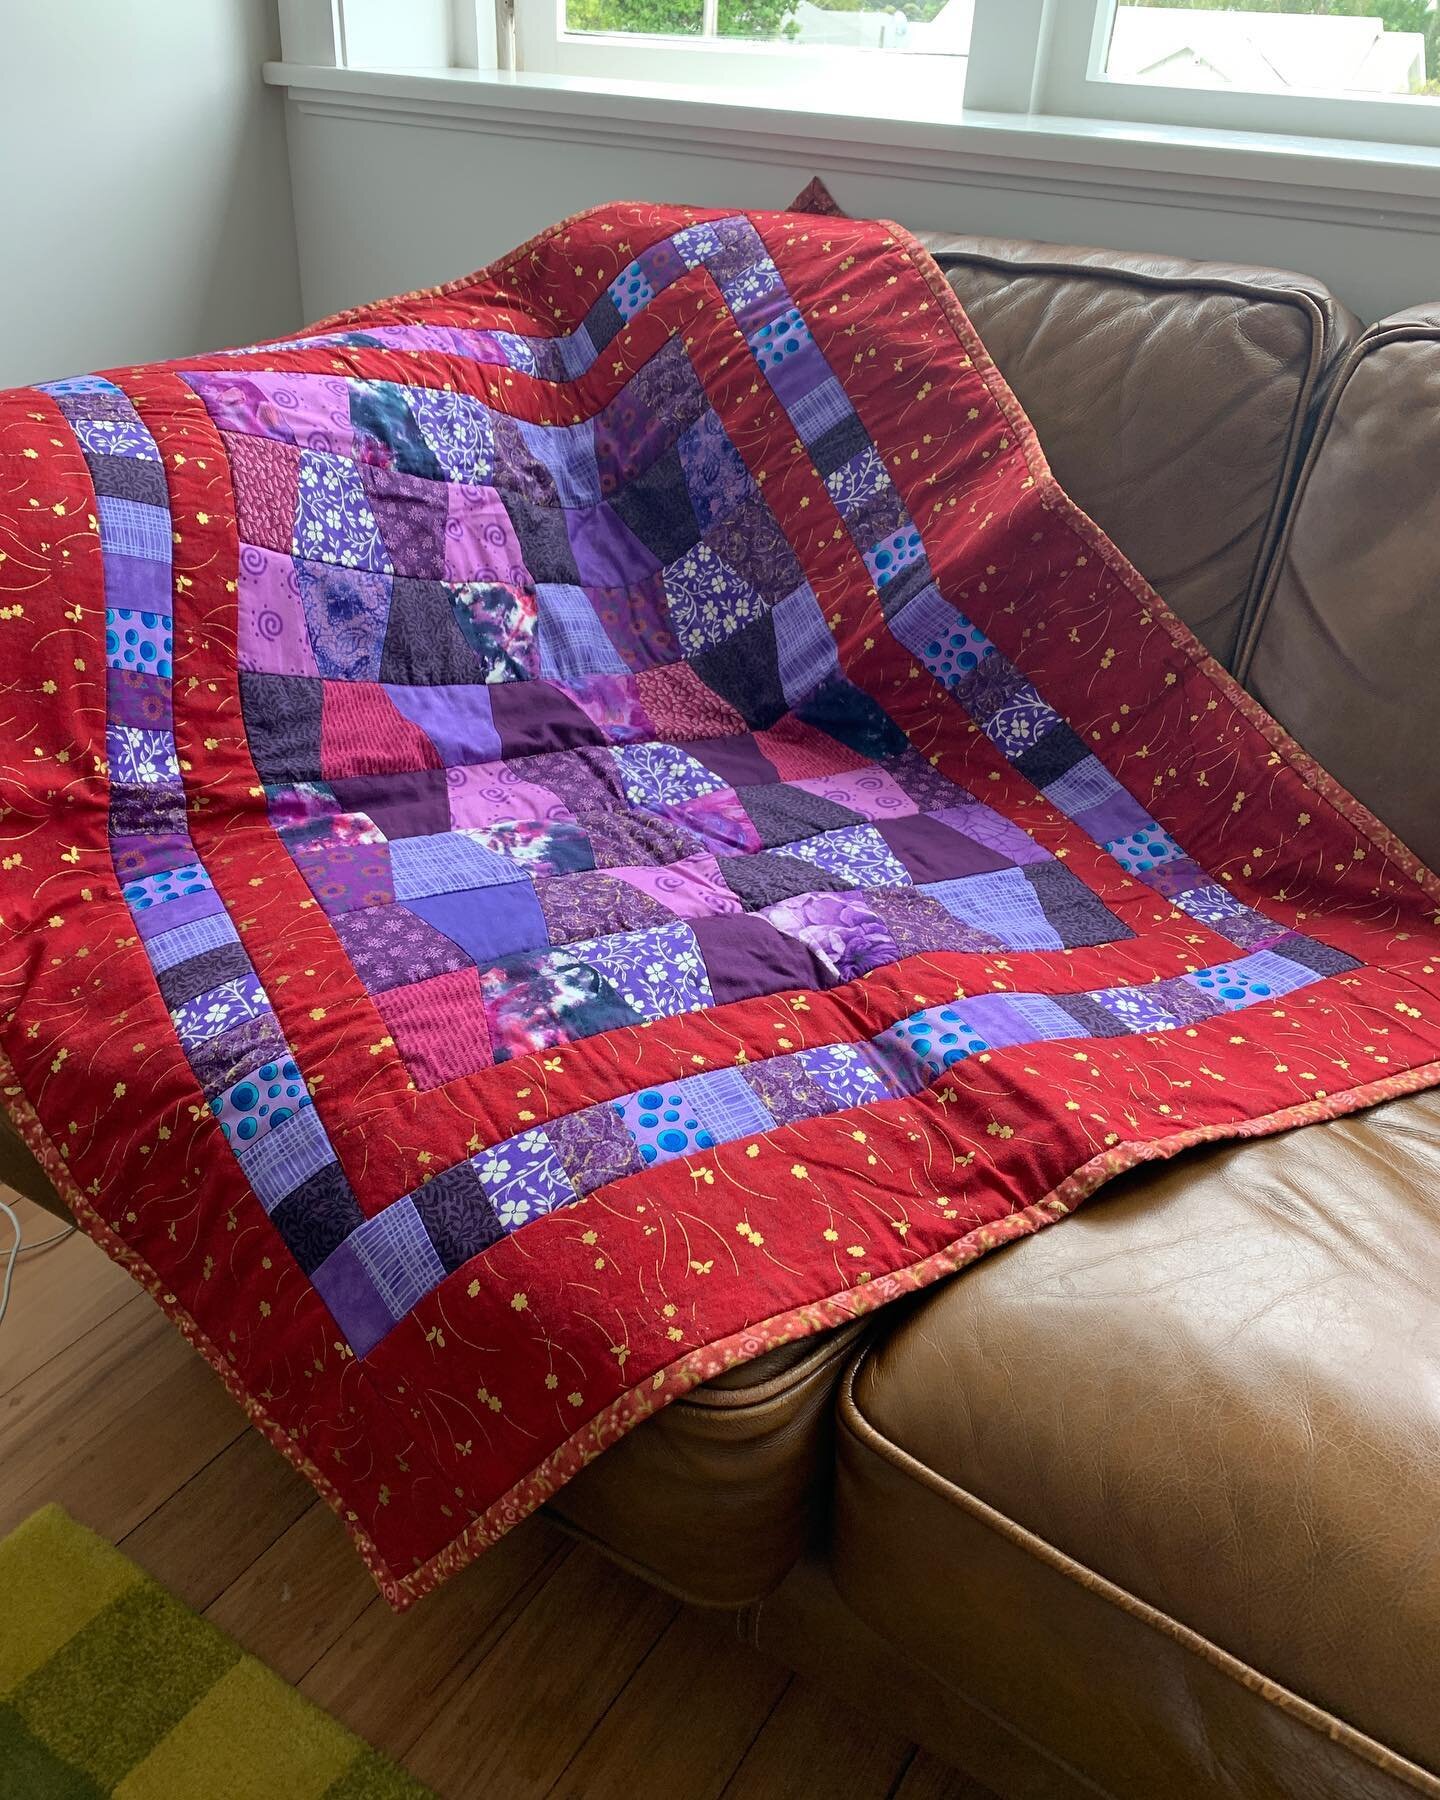 This quilt has been immaculately created with purple and pink fabrics.  Skilful and dedicated making by one of our group members who loves quilting, this is an heirloom piece. 

Cot sized and could also be a lovely play mat. 

$200 + postage

To purc